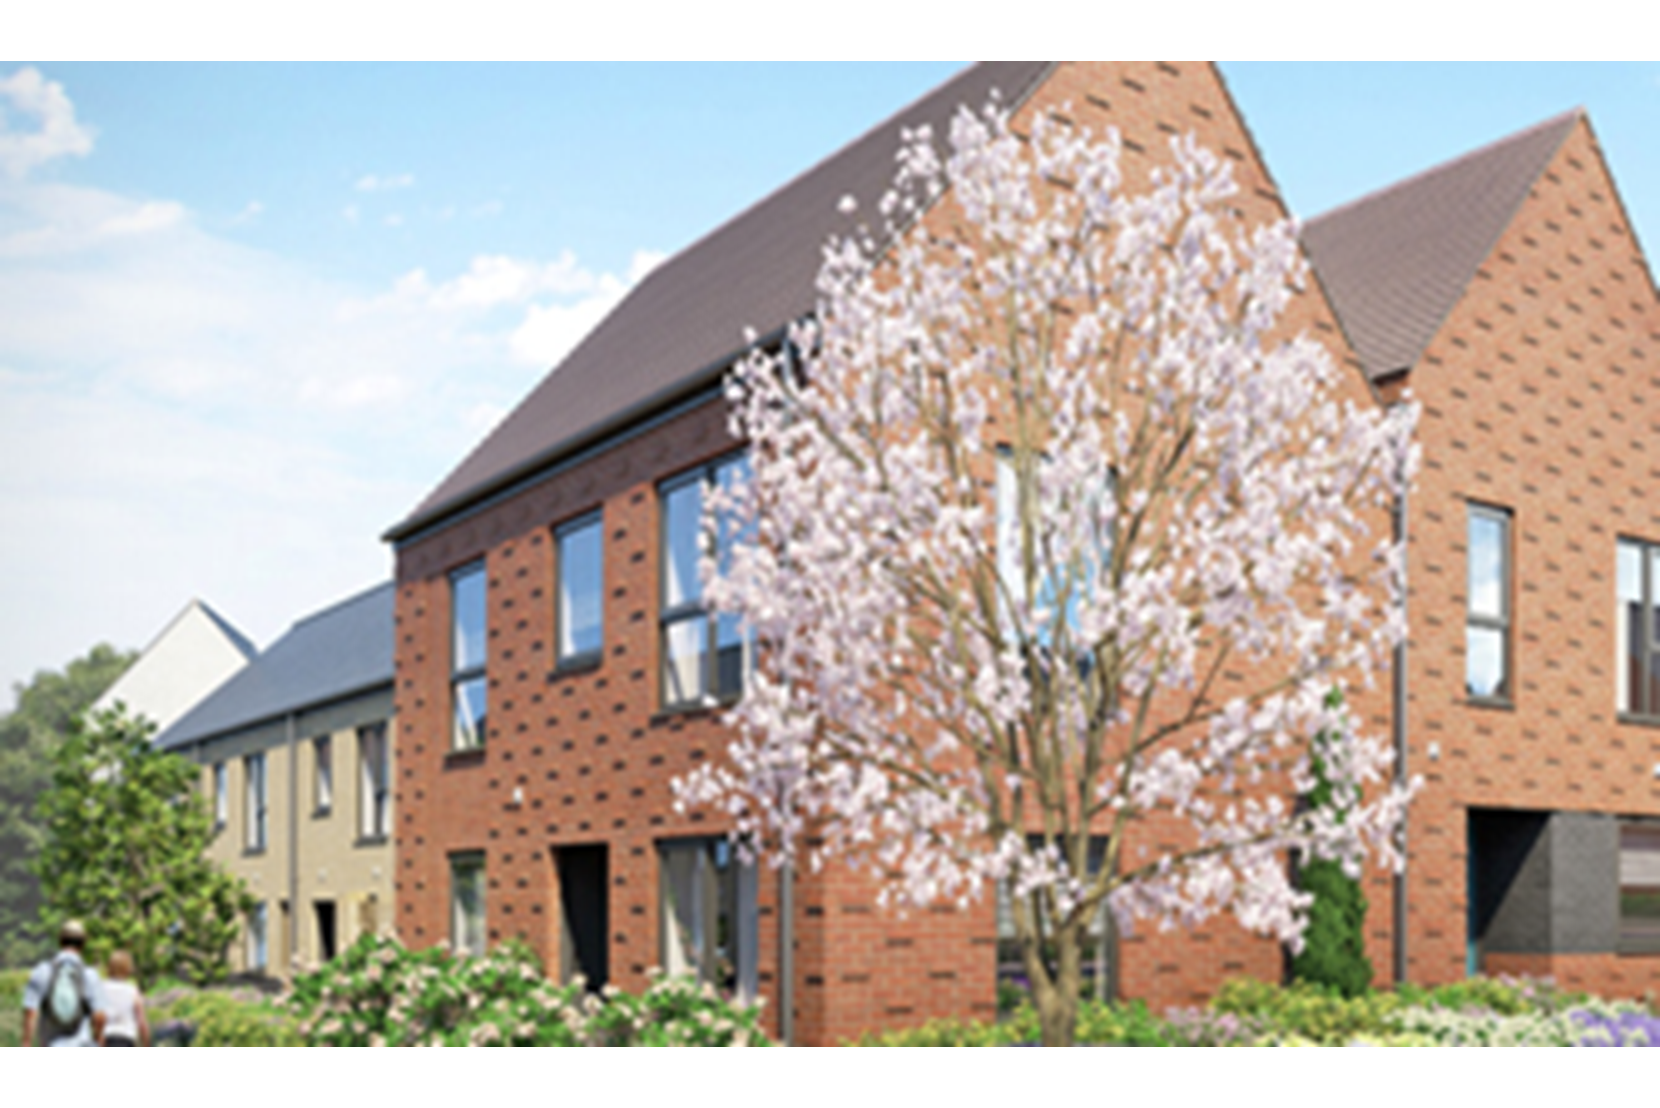 Houses to Rent by Simple Life at Base at Newhall, Harlow, CM17, development panoramic